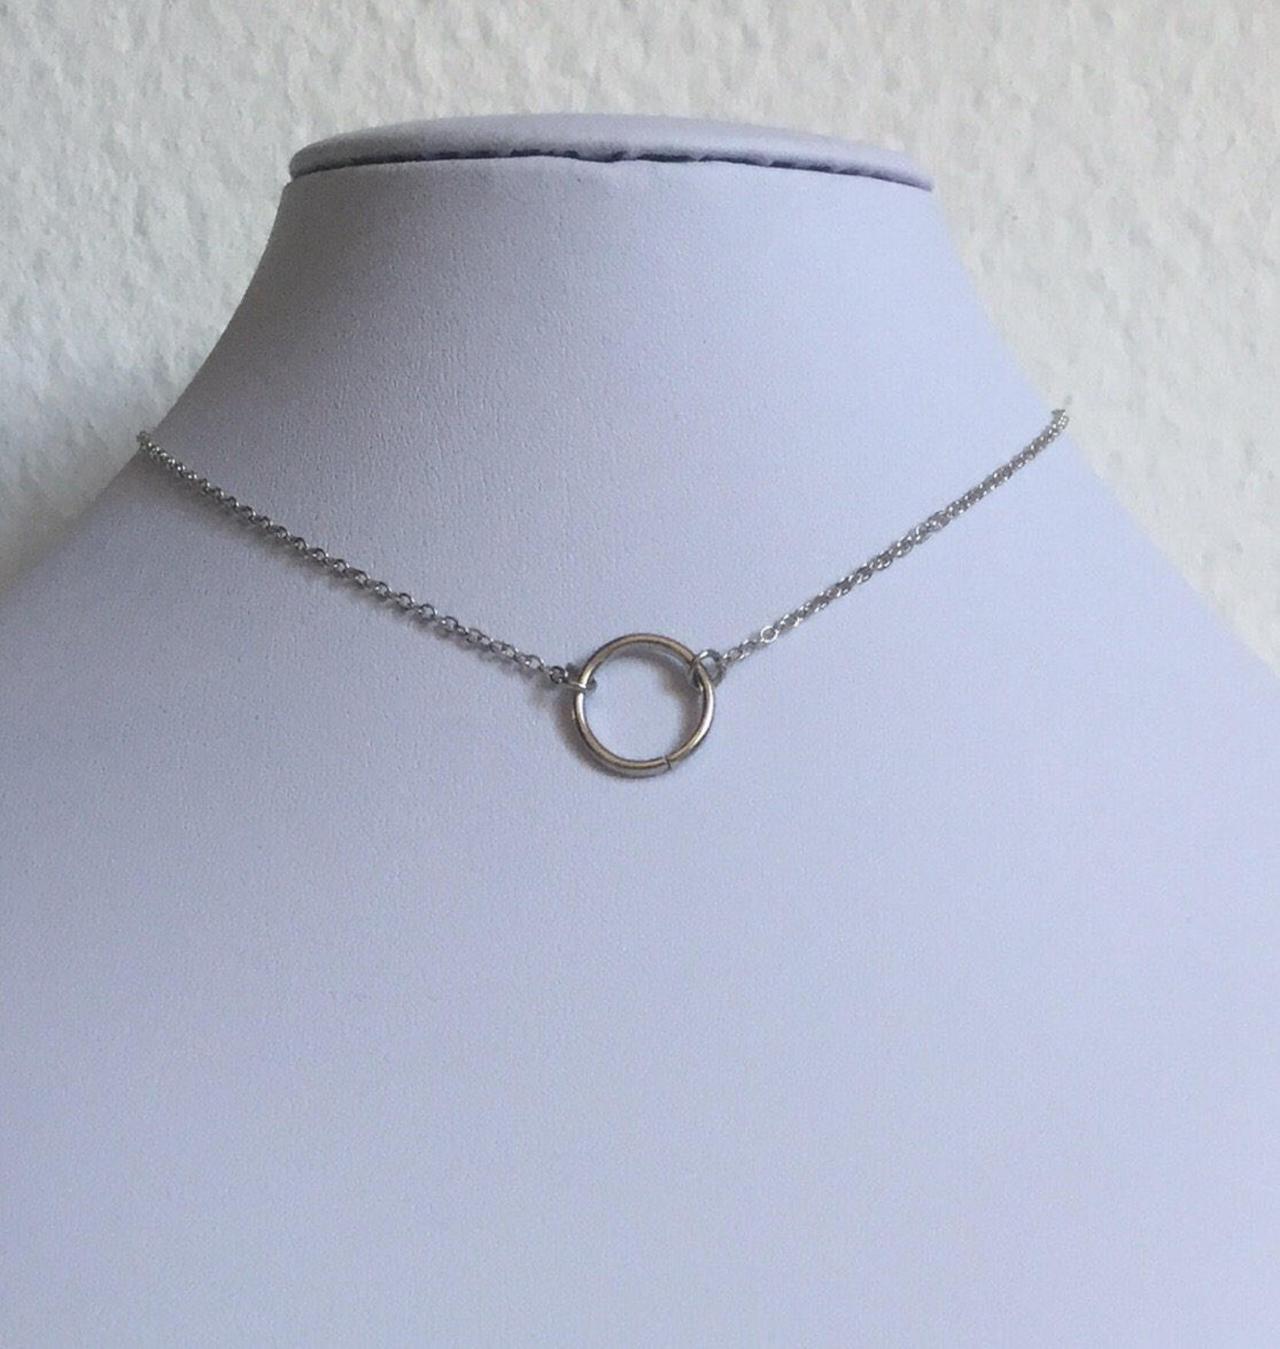 Karma Necklace 321- Circle Karma Necklace Bohemian Alloy Silver Chain Boho Chic Jewelry Lucky Necklace Gift Talisman